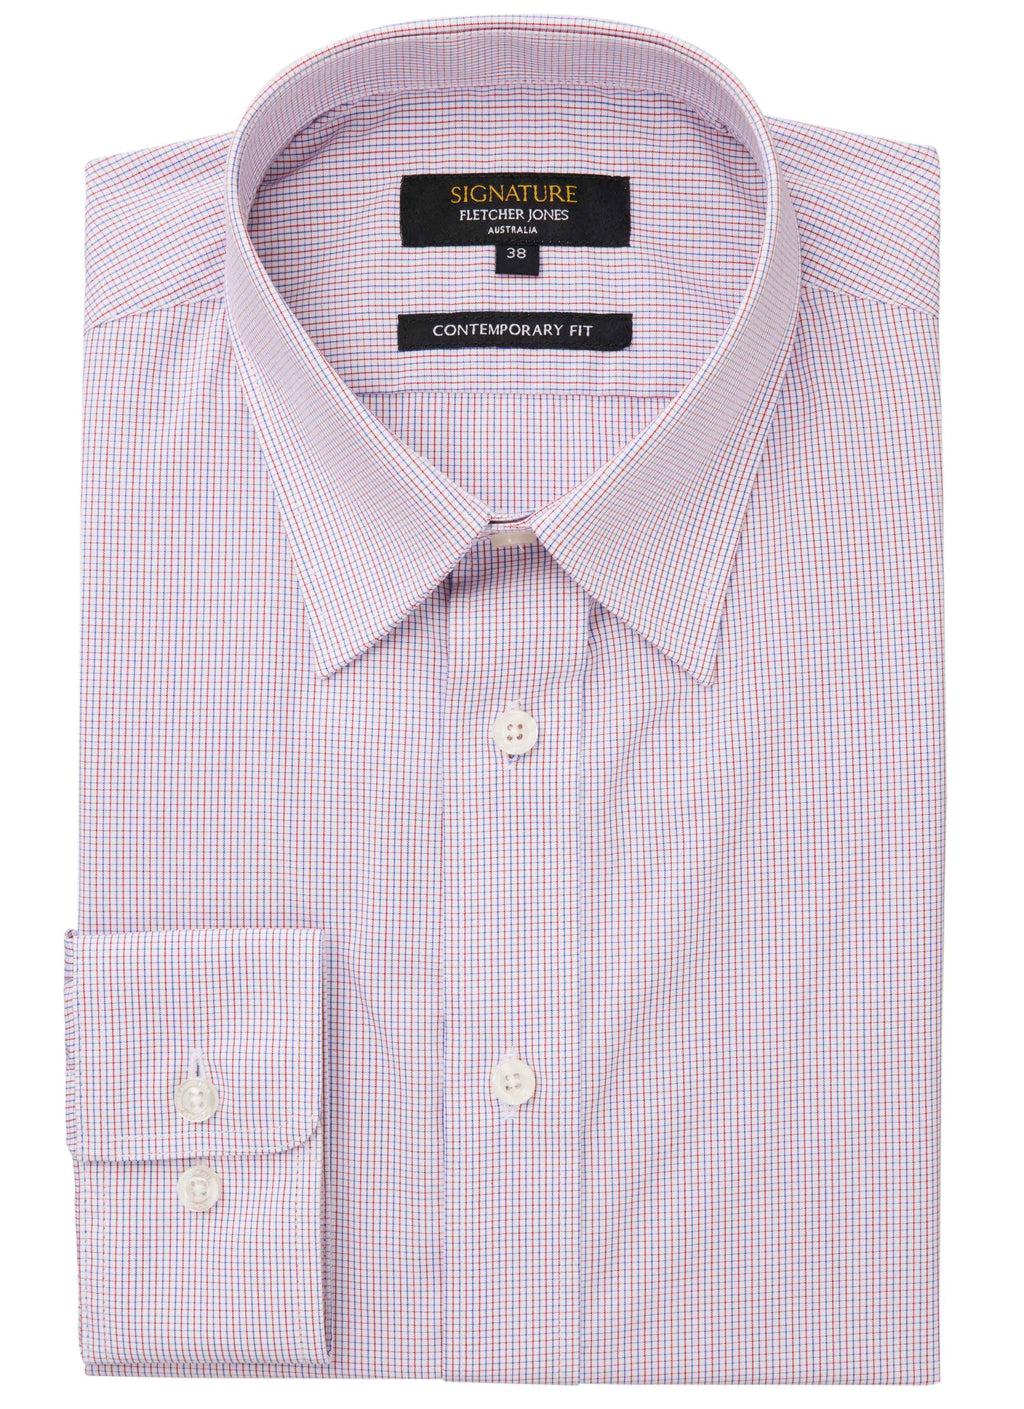 KOORDA CONTEMPORARY FIT BUSINESS SHIRT - RED BLUE CHECK